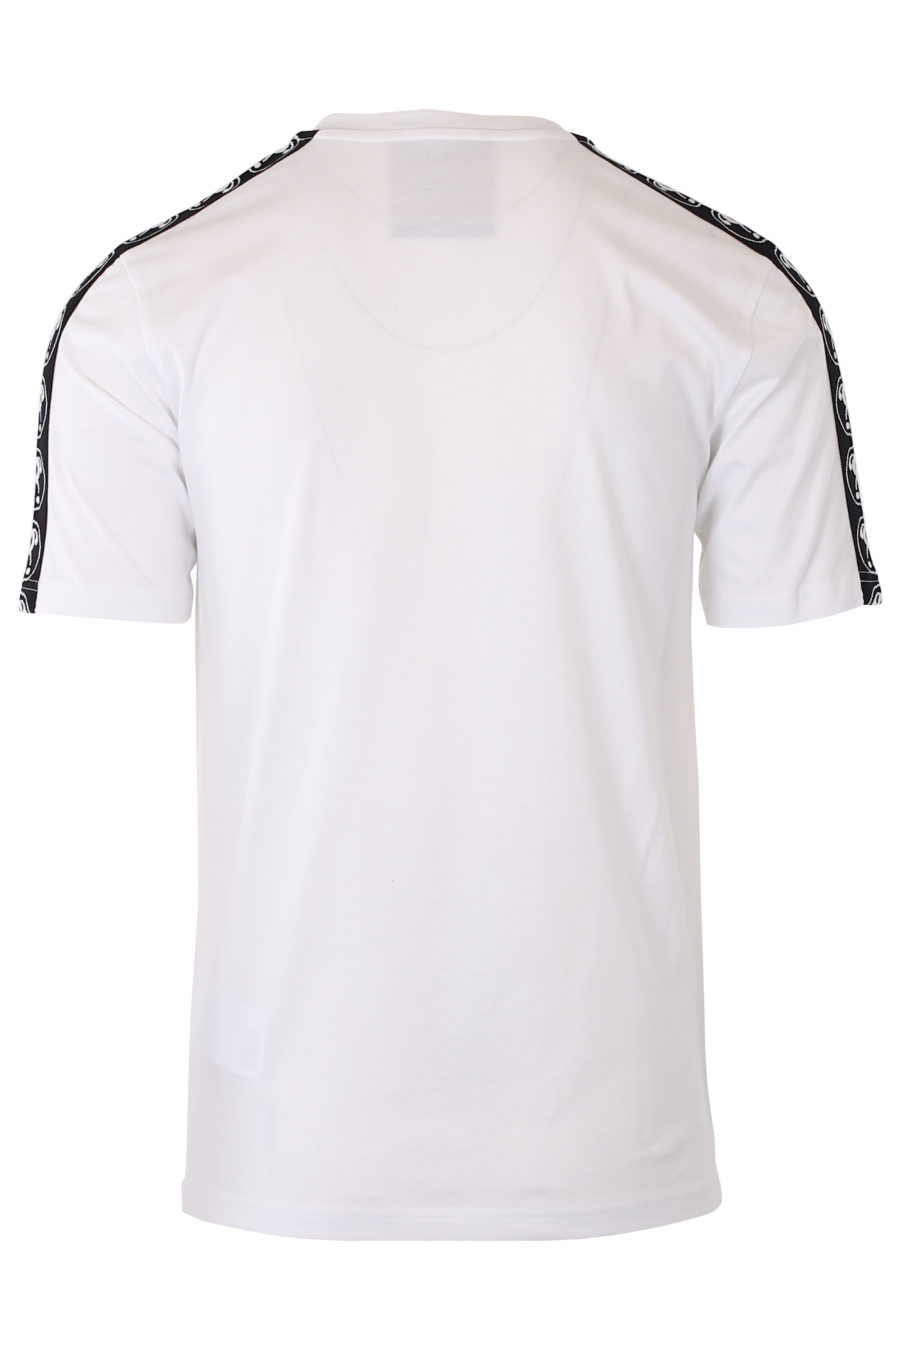 White T-shirt with small double question logo and tape on sleeves - IMG 9333